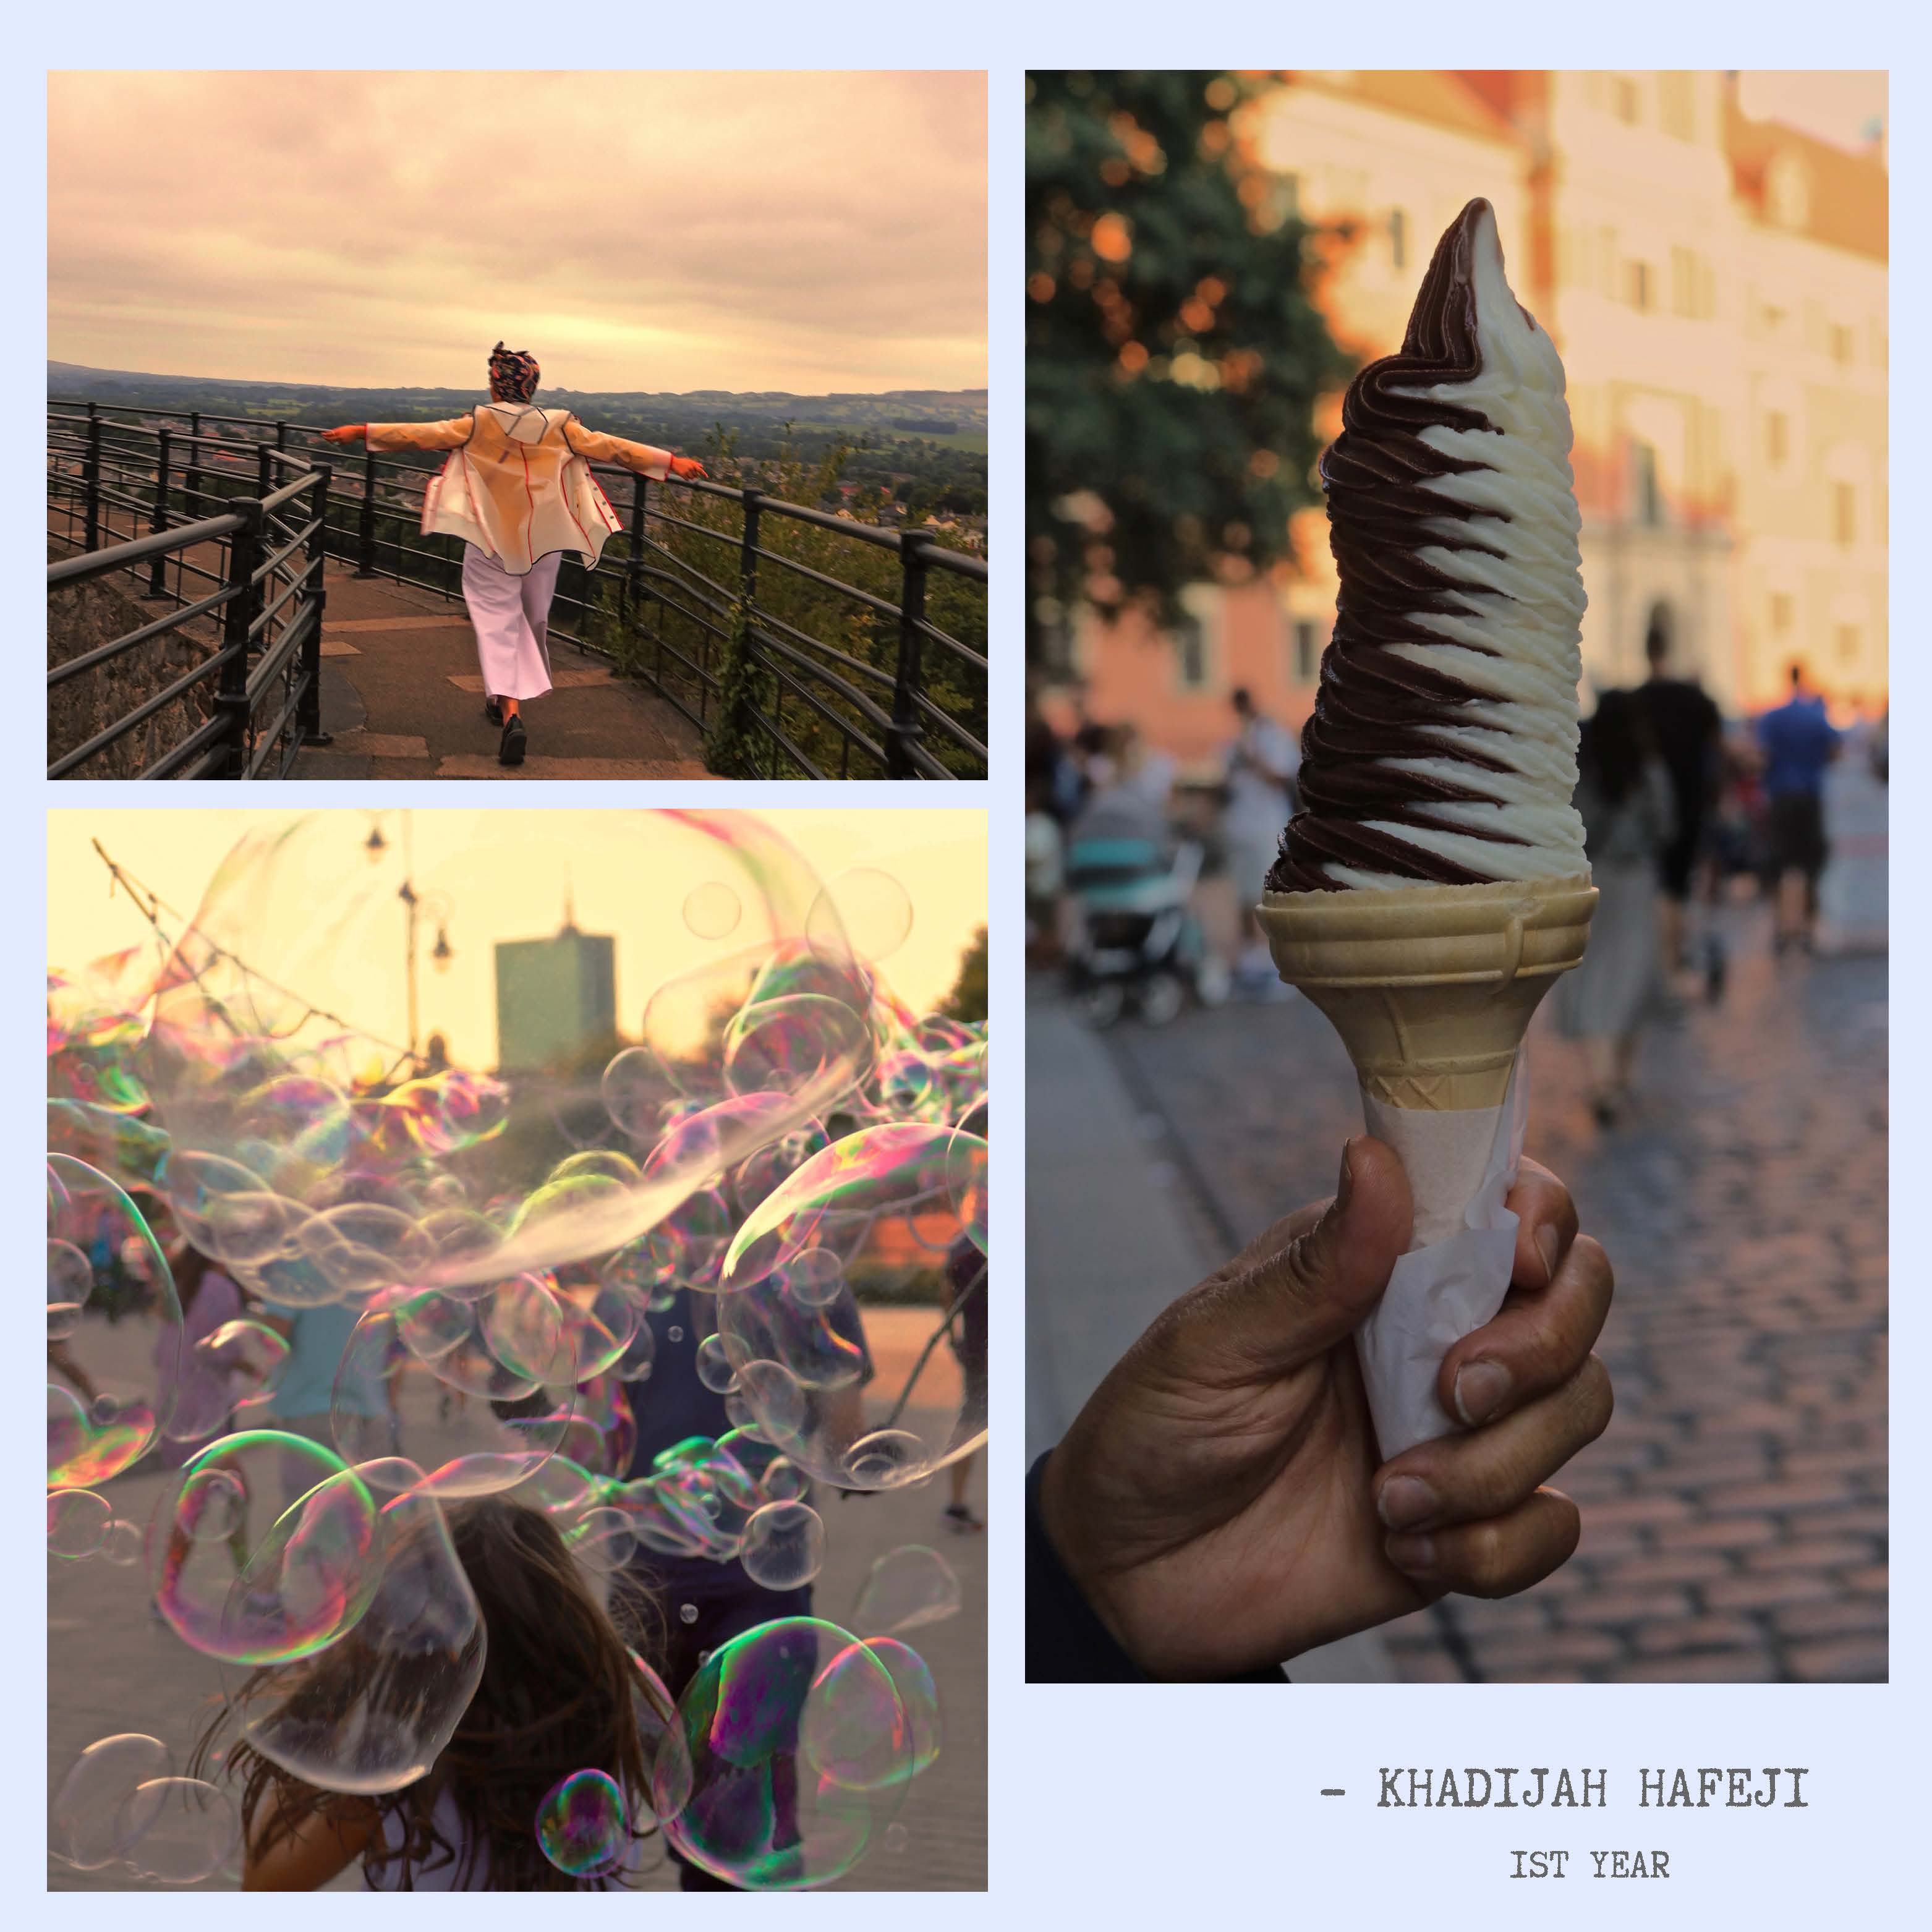 3 pictures: woman from behind with arms outstretched walking across a bridge; an ice cream held by the cone; a child blowing bubbles